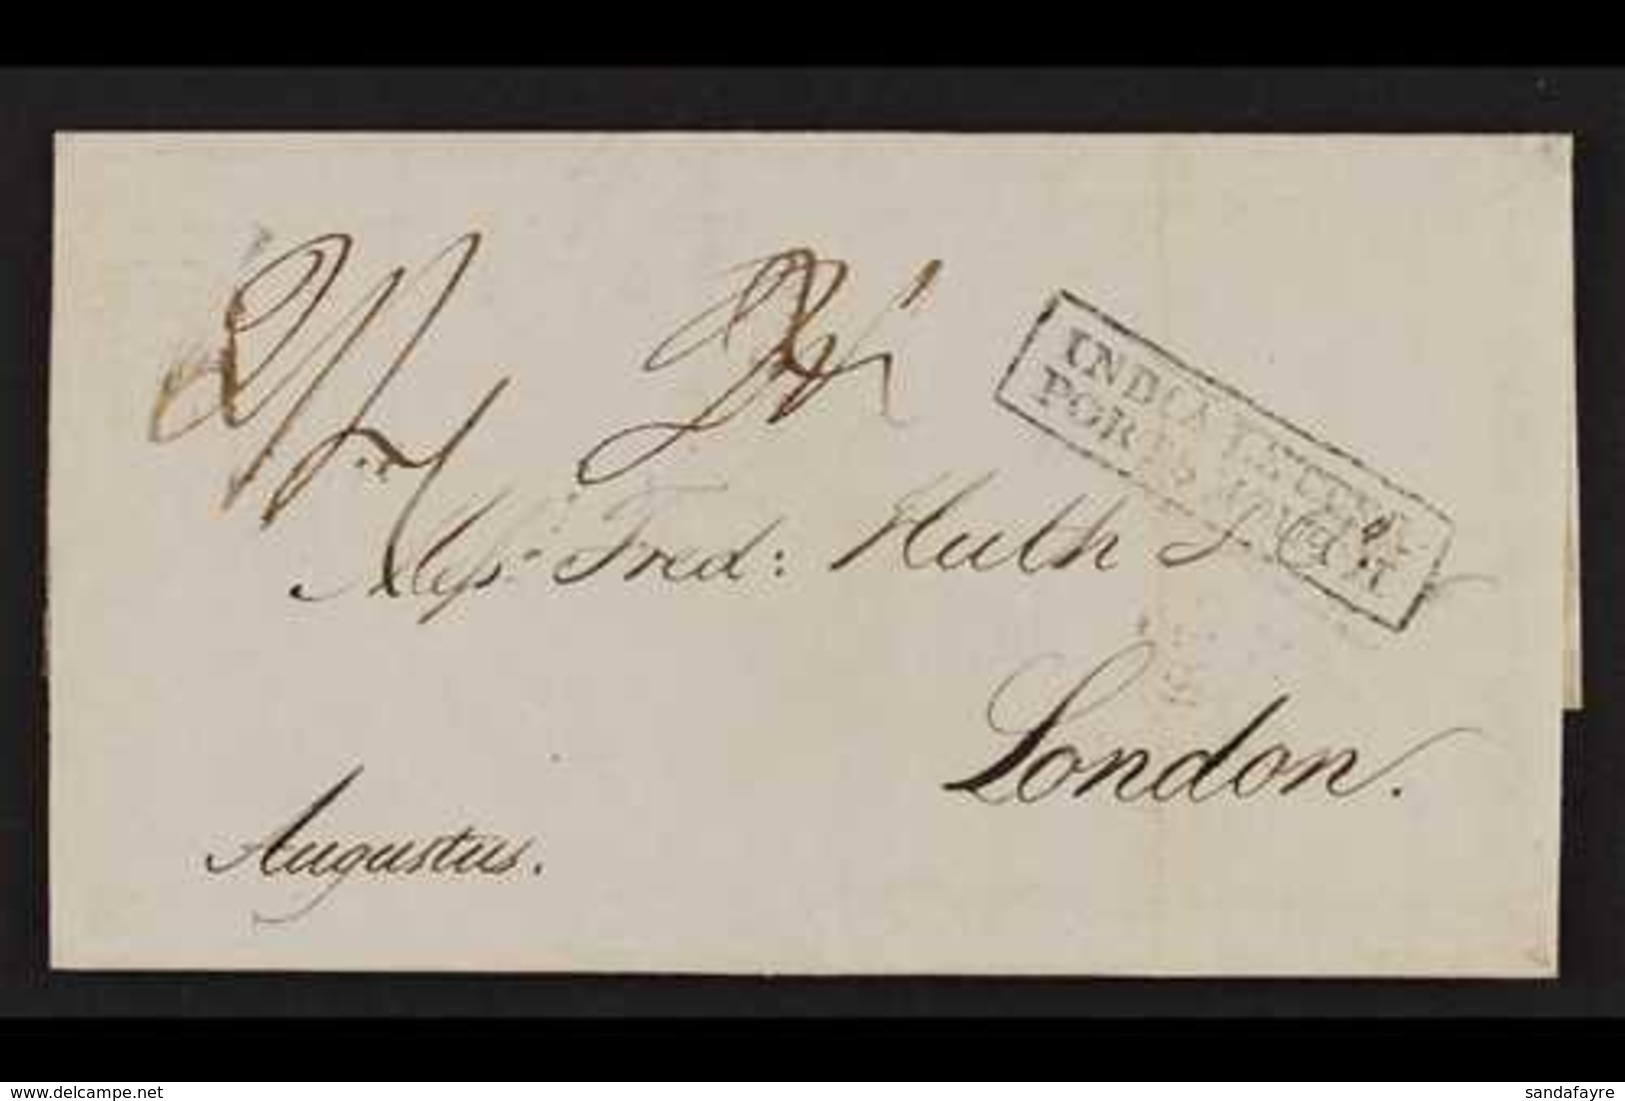 1838 (October) Letter Written In French From Port Louis To Huth In London, Endorsed "AUGUSTUS", And Showing A Red Double - Maurice (...-1967)